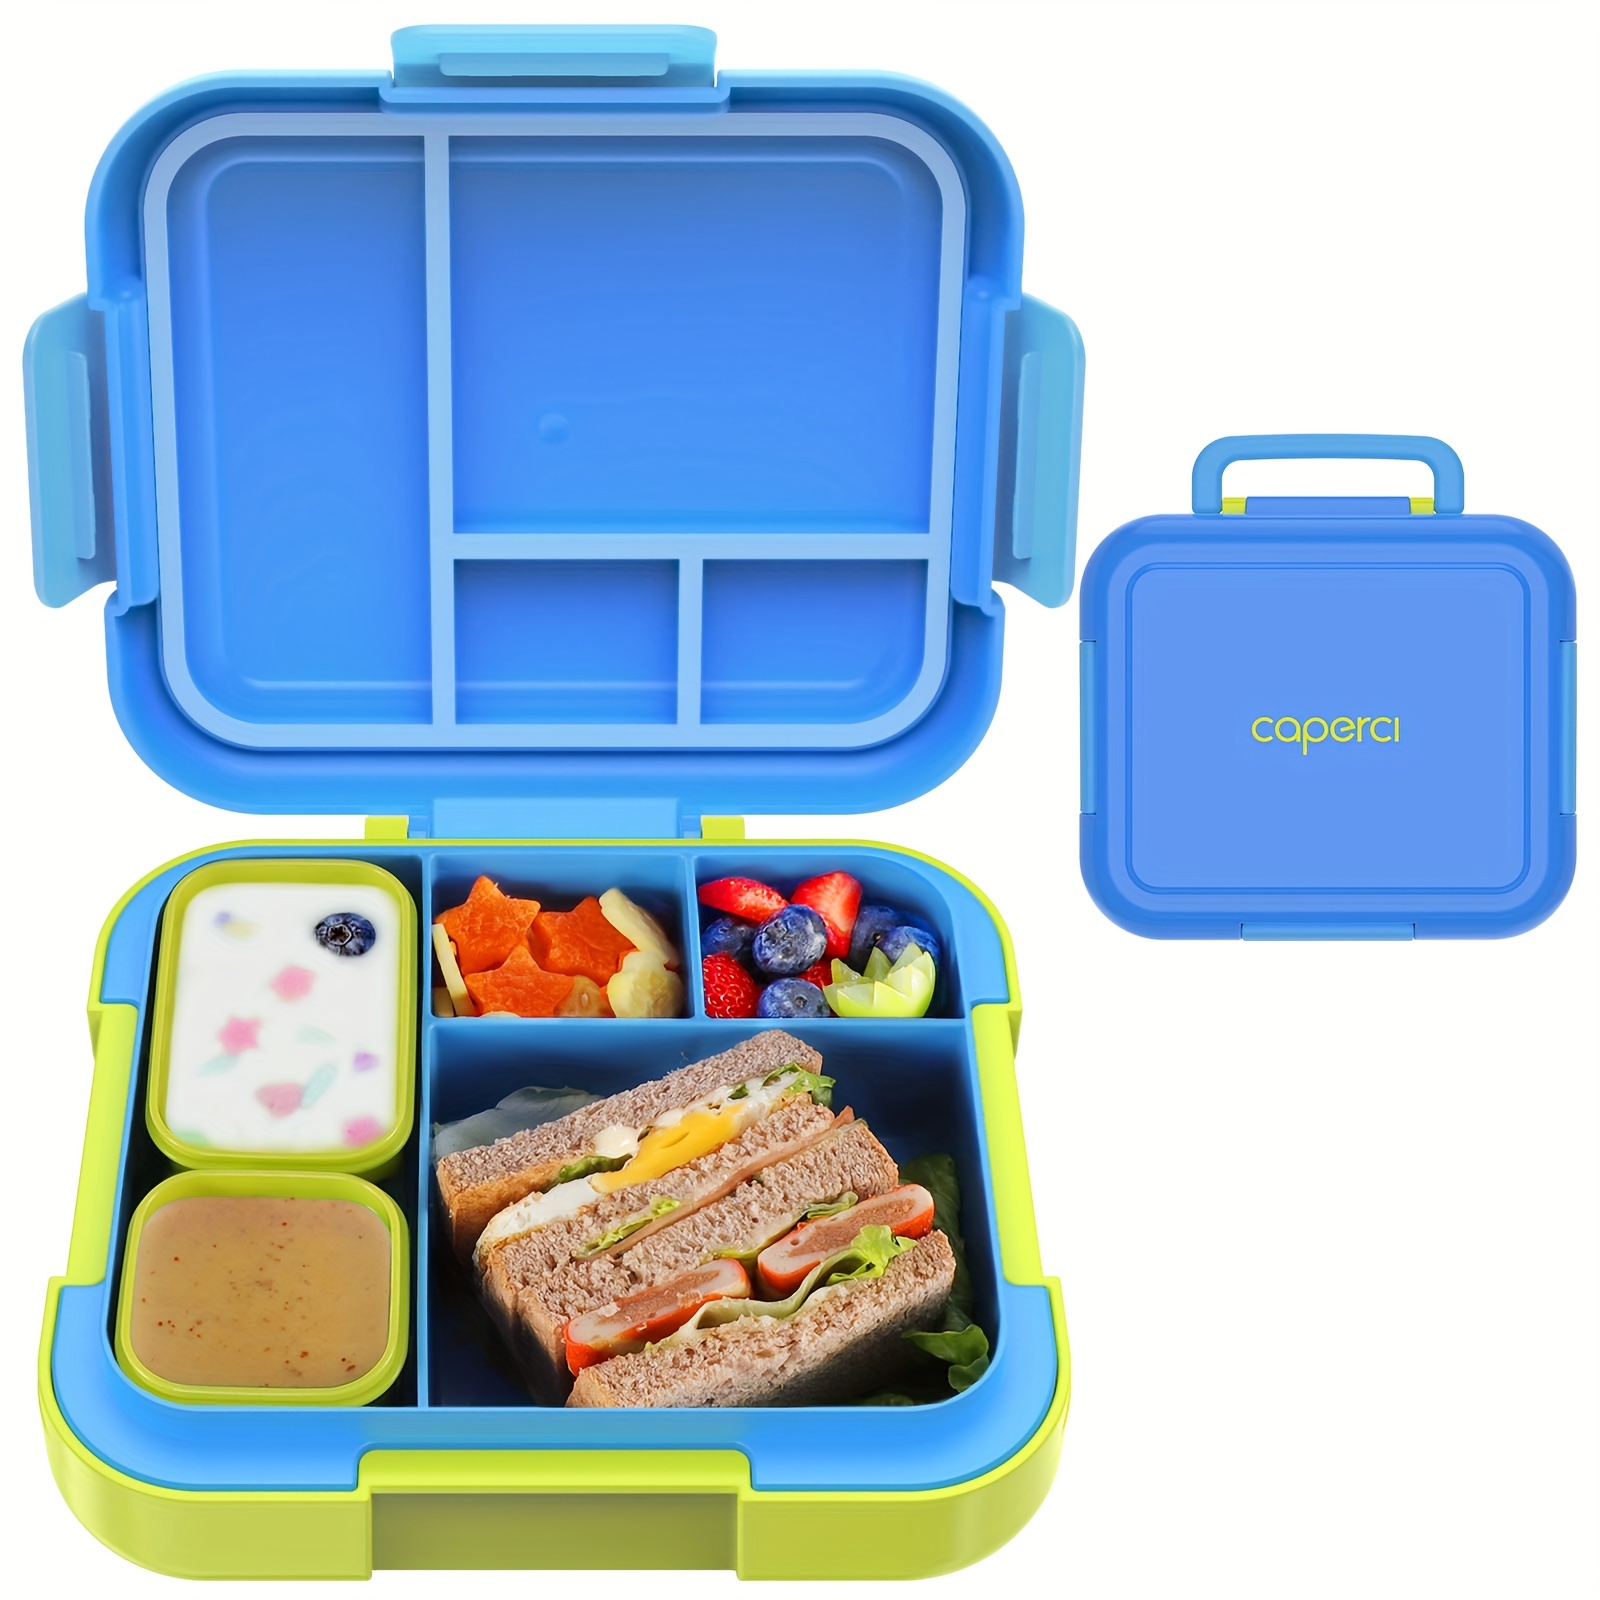 

1pc, Bento Lunch Box For Kids - Large 4.8 Cups Lunch Container With 2 Modular Containers - 4 Compartments, Leak-proof, Portable Handle, Microwave/dishwasher Safe